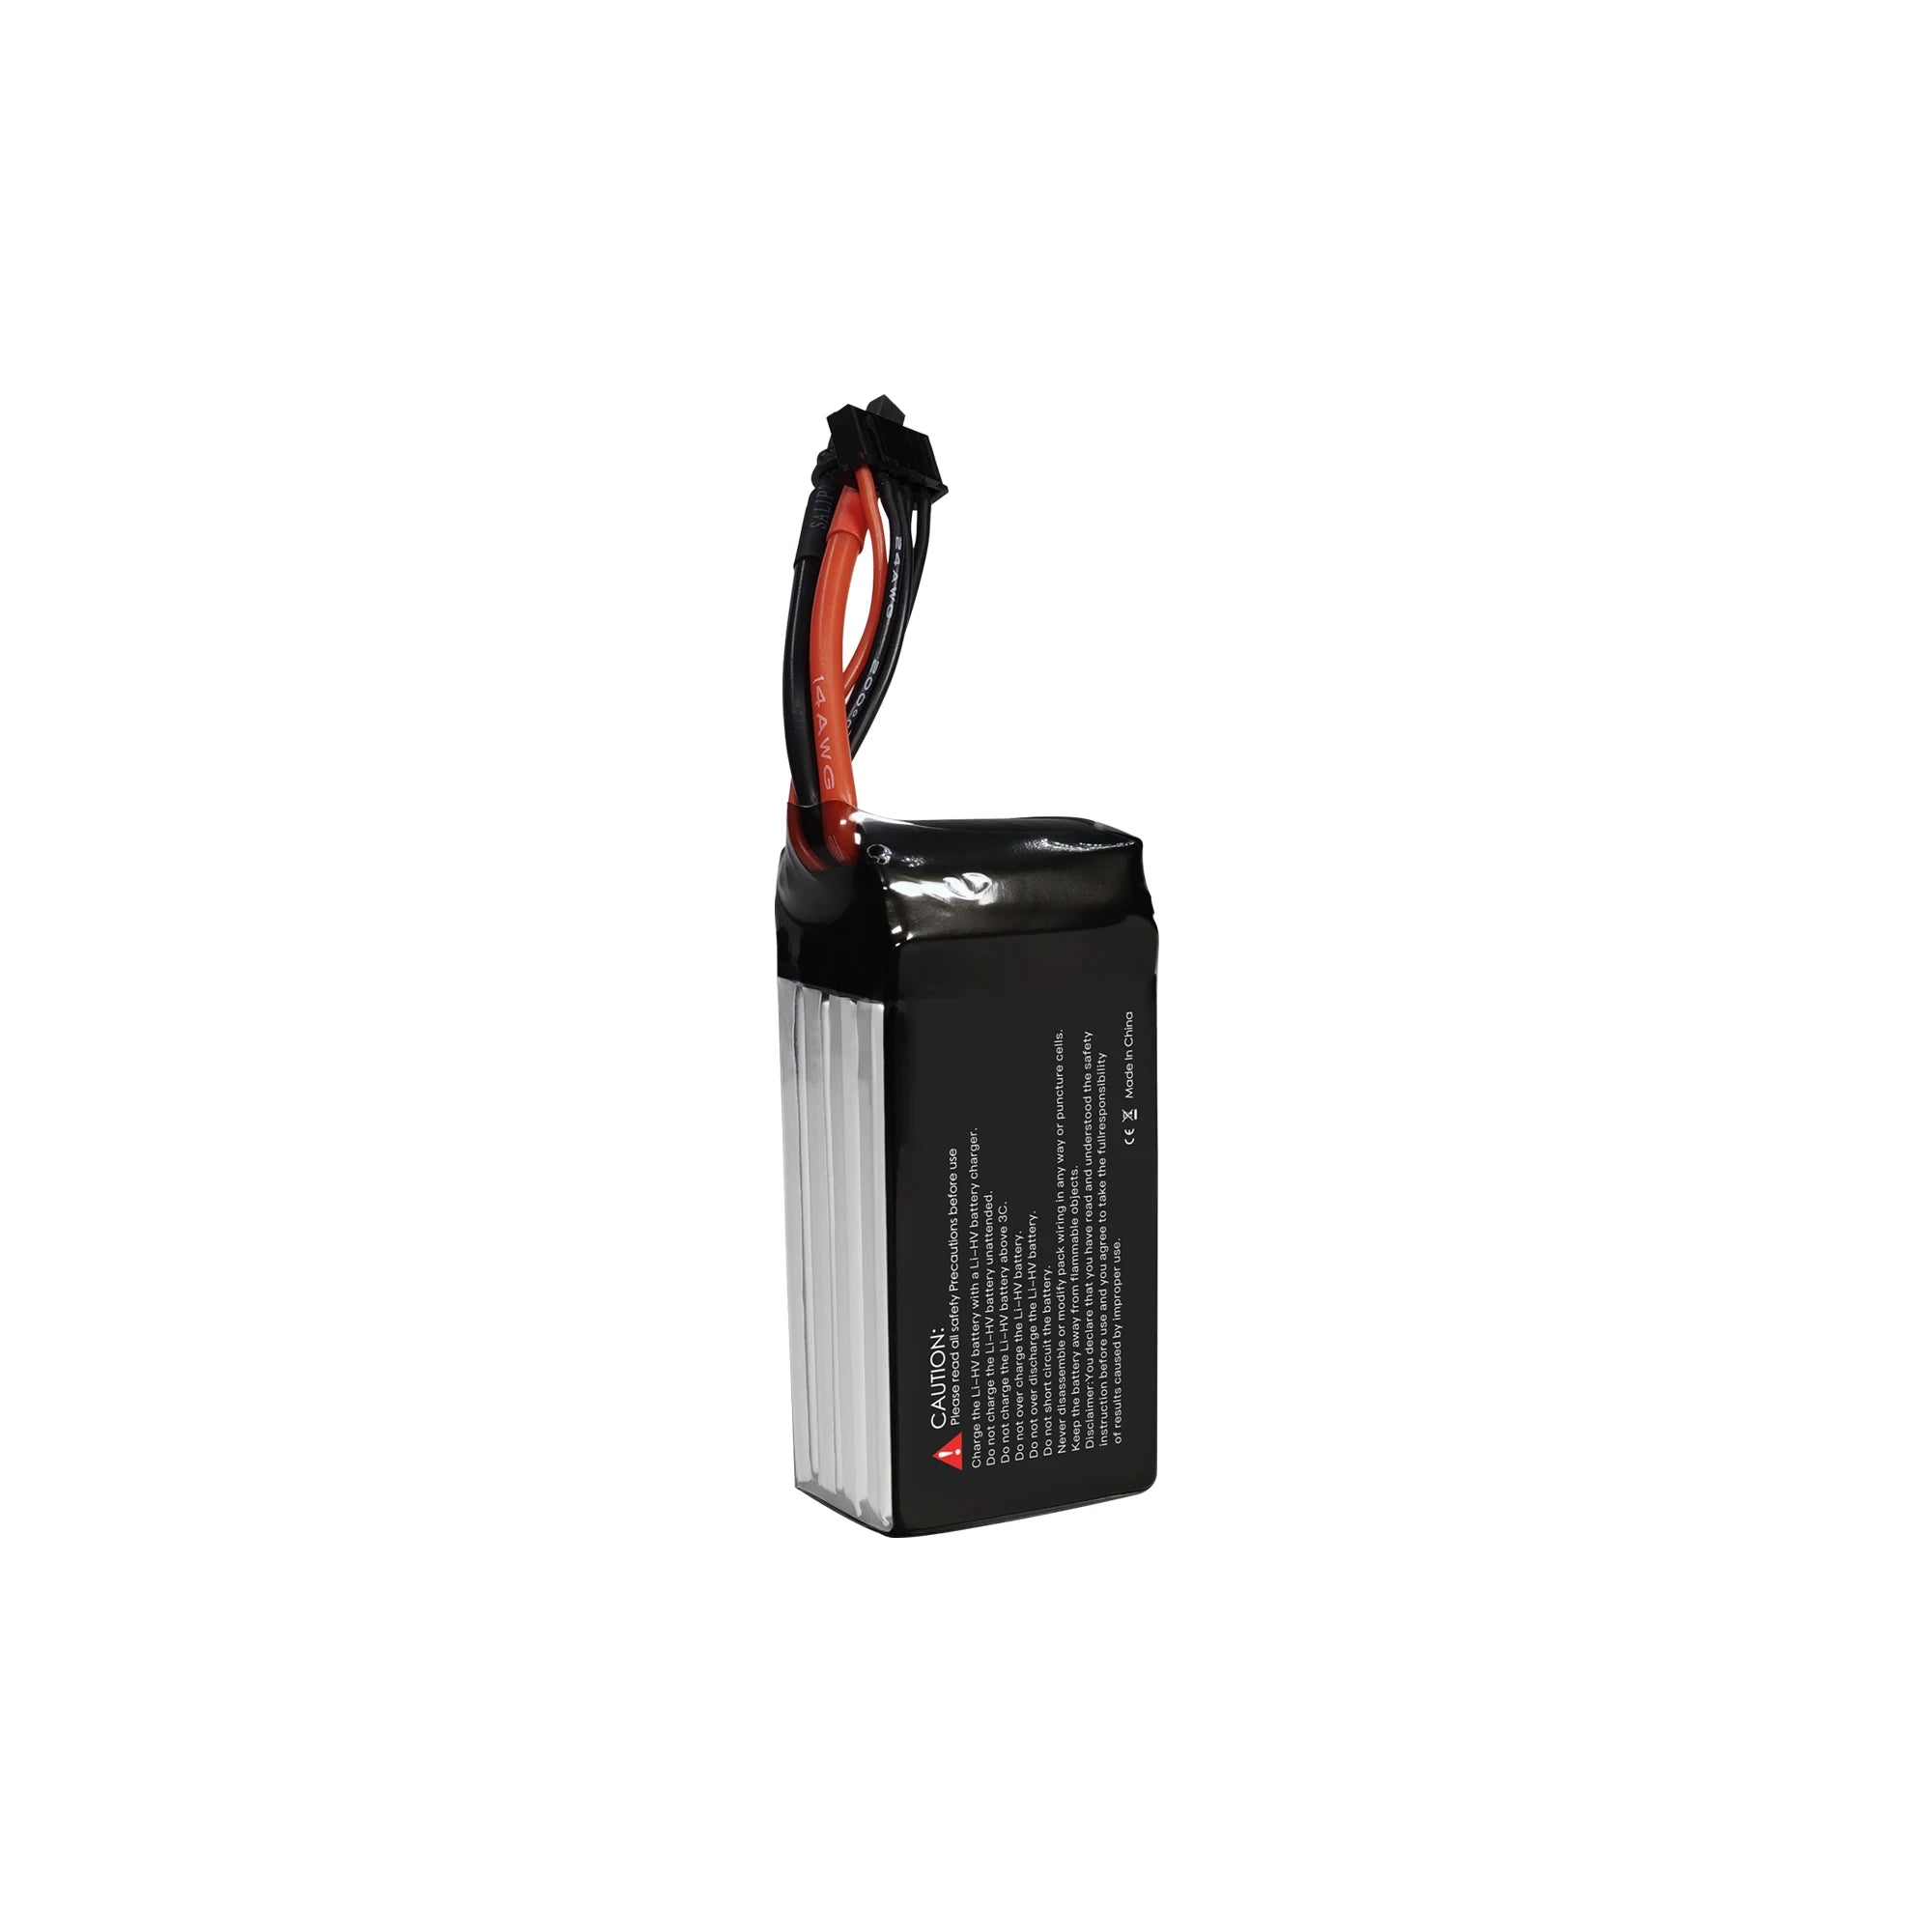 GEPRC 4S 1100mAh 110C LiPo Battery, A: It is recommended to use the HOTA D6 PRO charger, ISDT 608